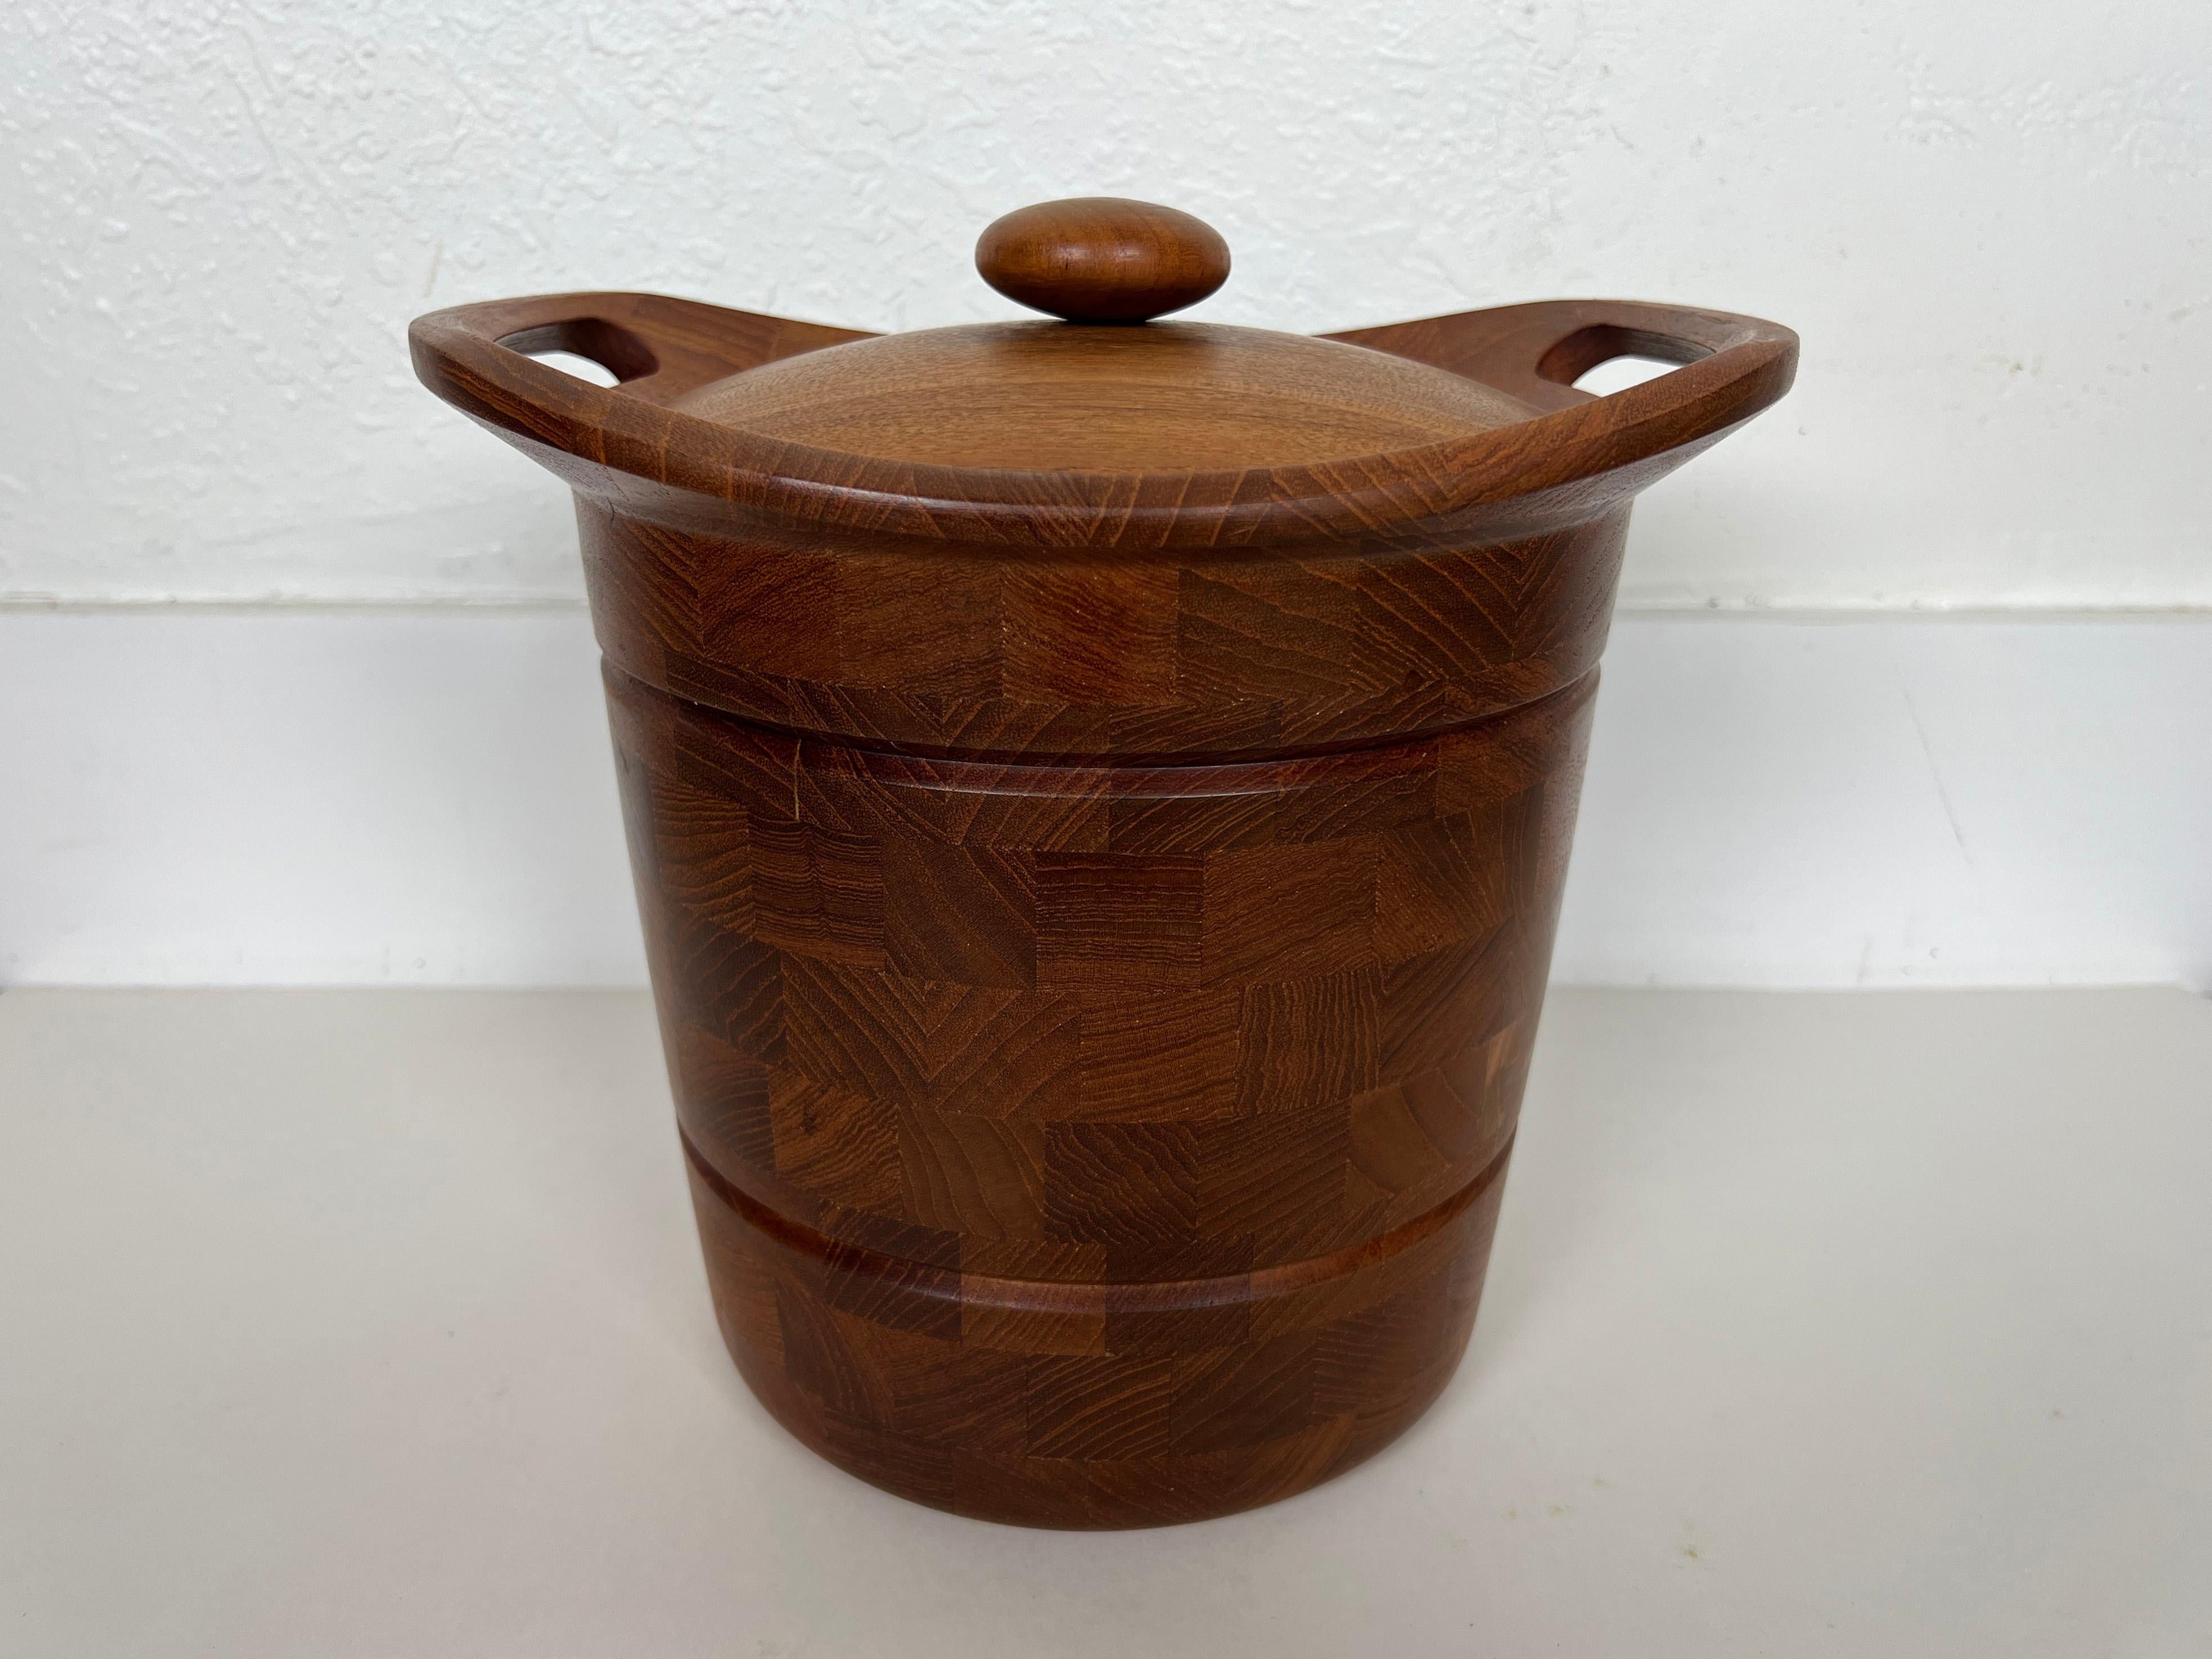 Vintage Scandinavian ice bucket with removable plastic insert and lid. Expertly crafted in a patchwork of end-grain teak. 

Manufacturer: ESB

Year: 1960s

Origin: Denmark

Style: Mid-Century Modern / Scandinavian / Danish